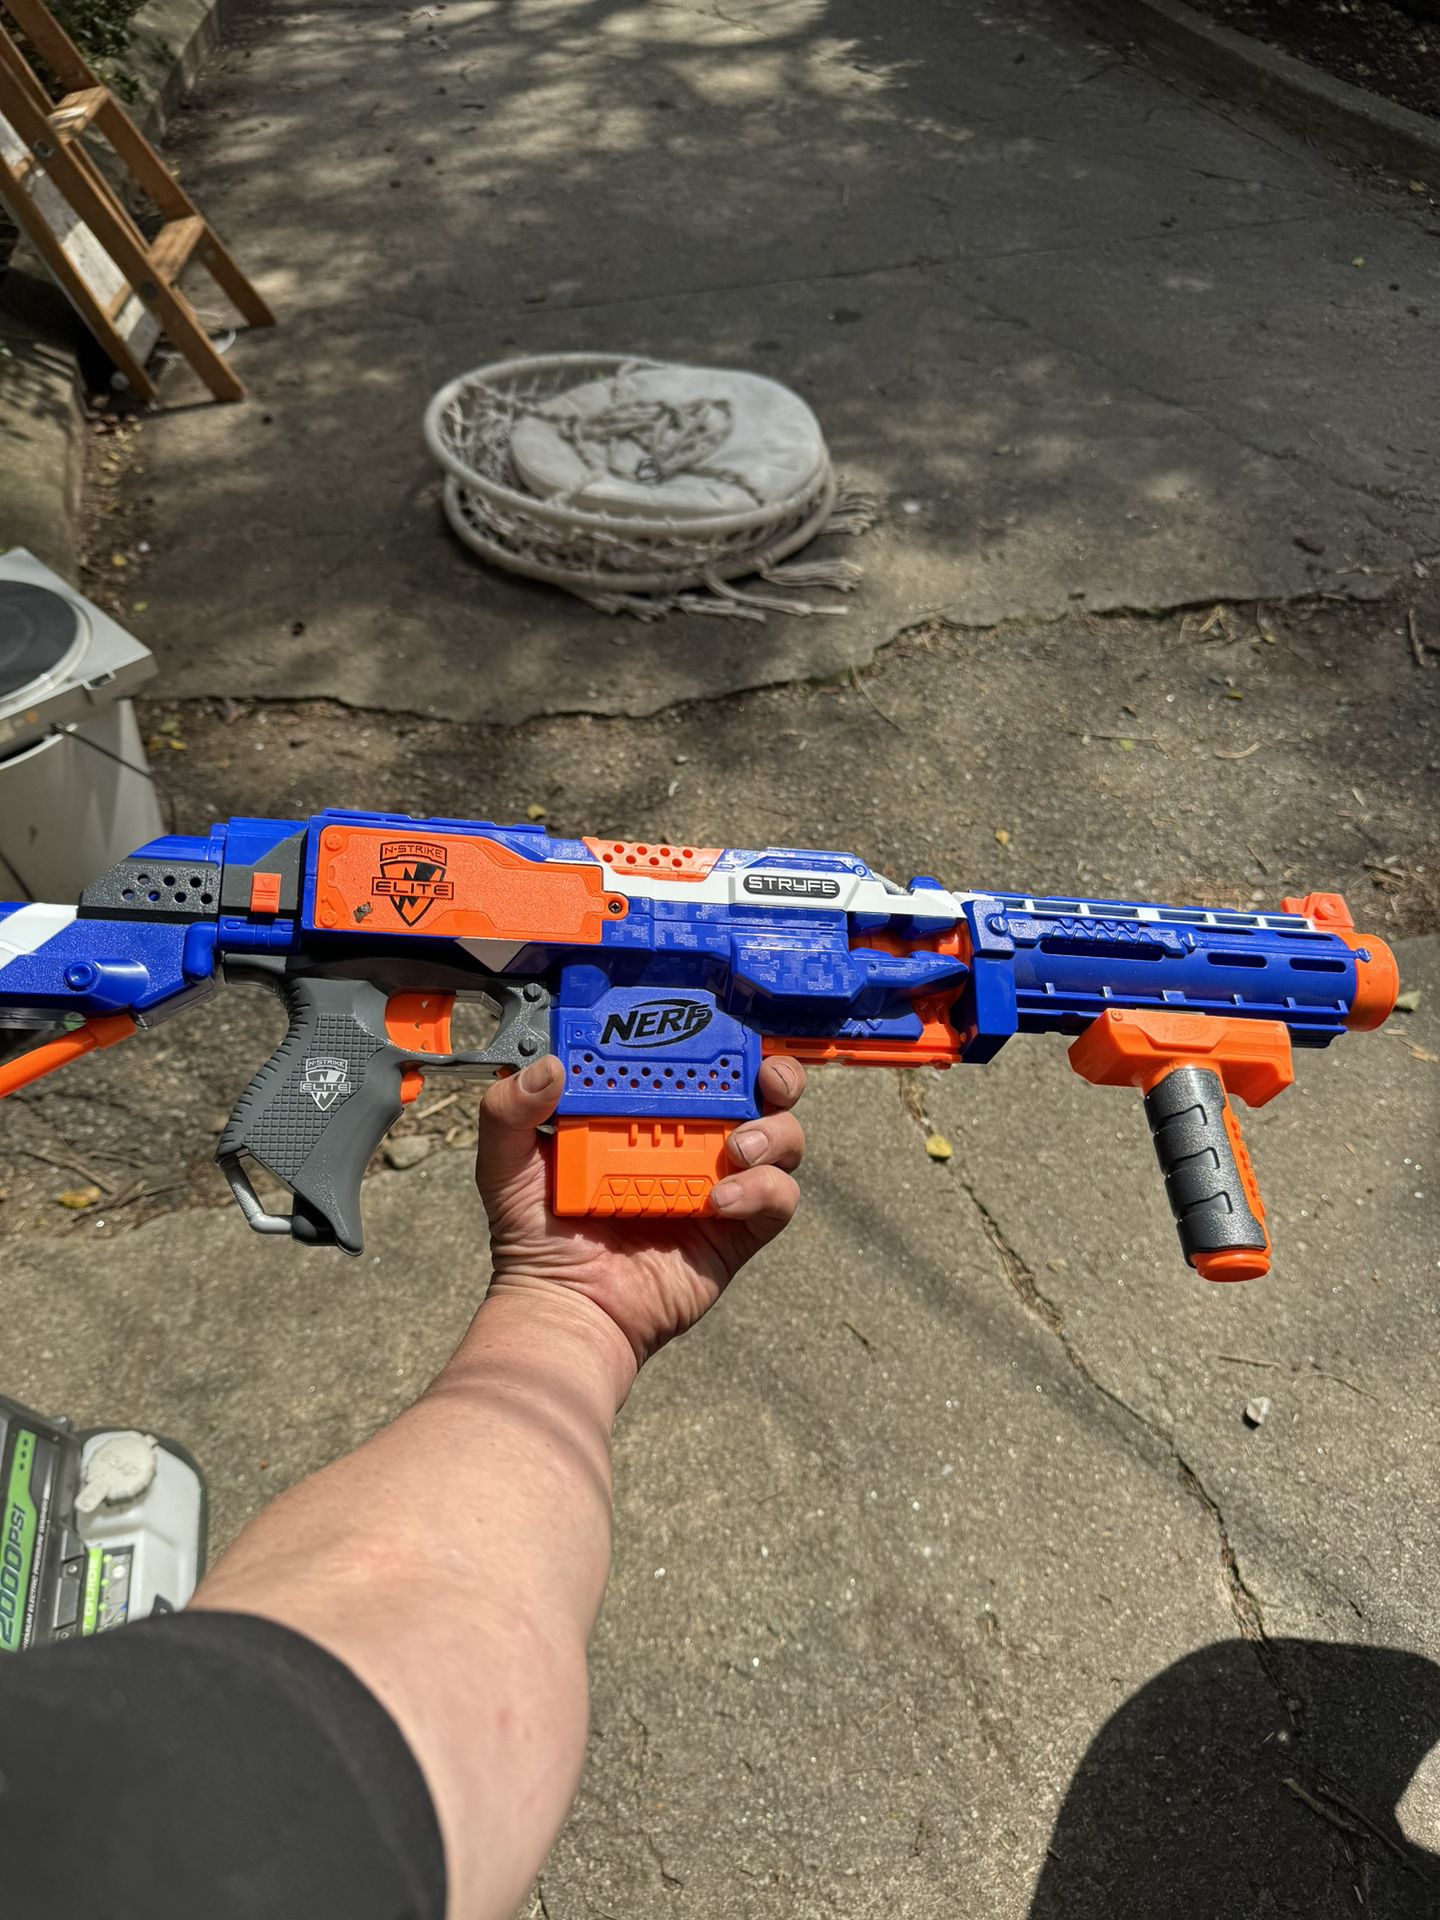 Nerf Guns (2)  With About 20-30 Bullets